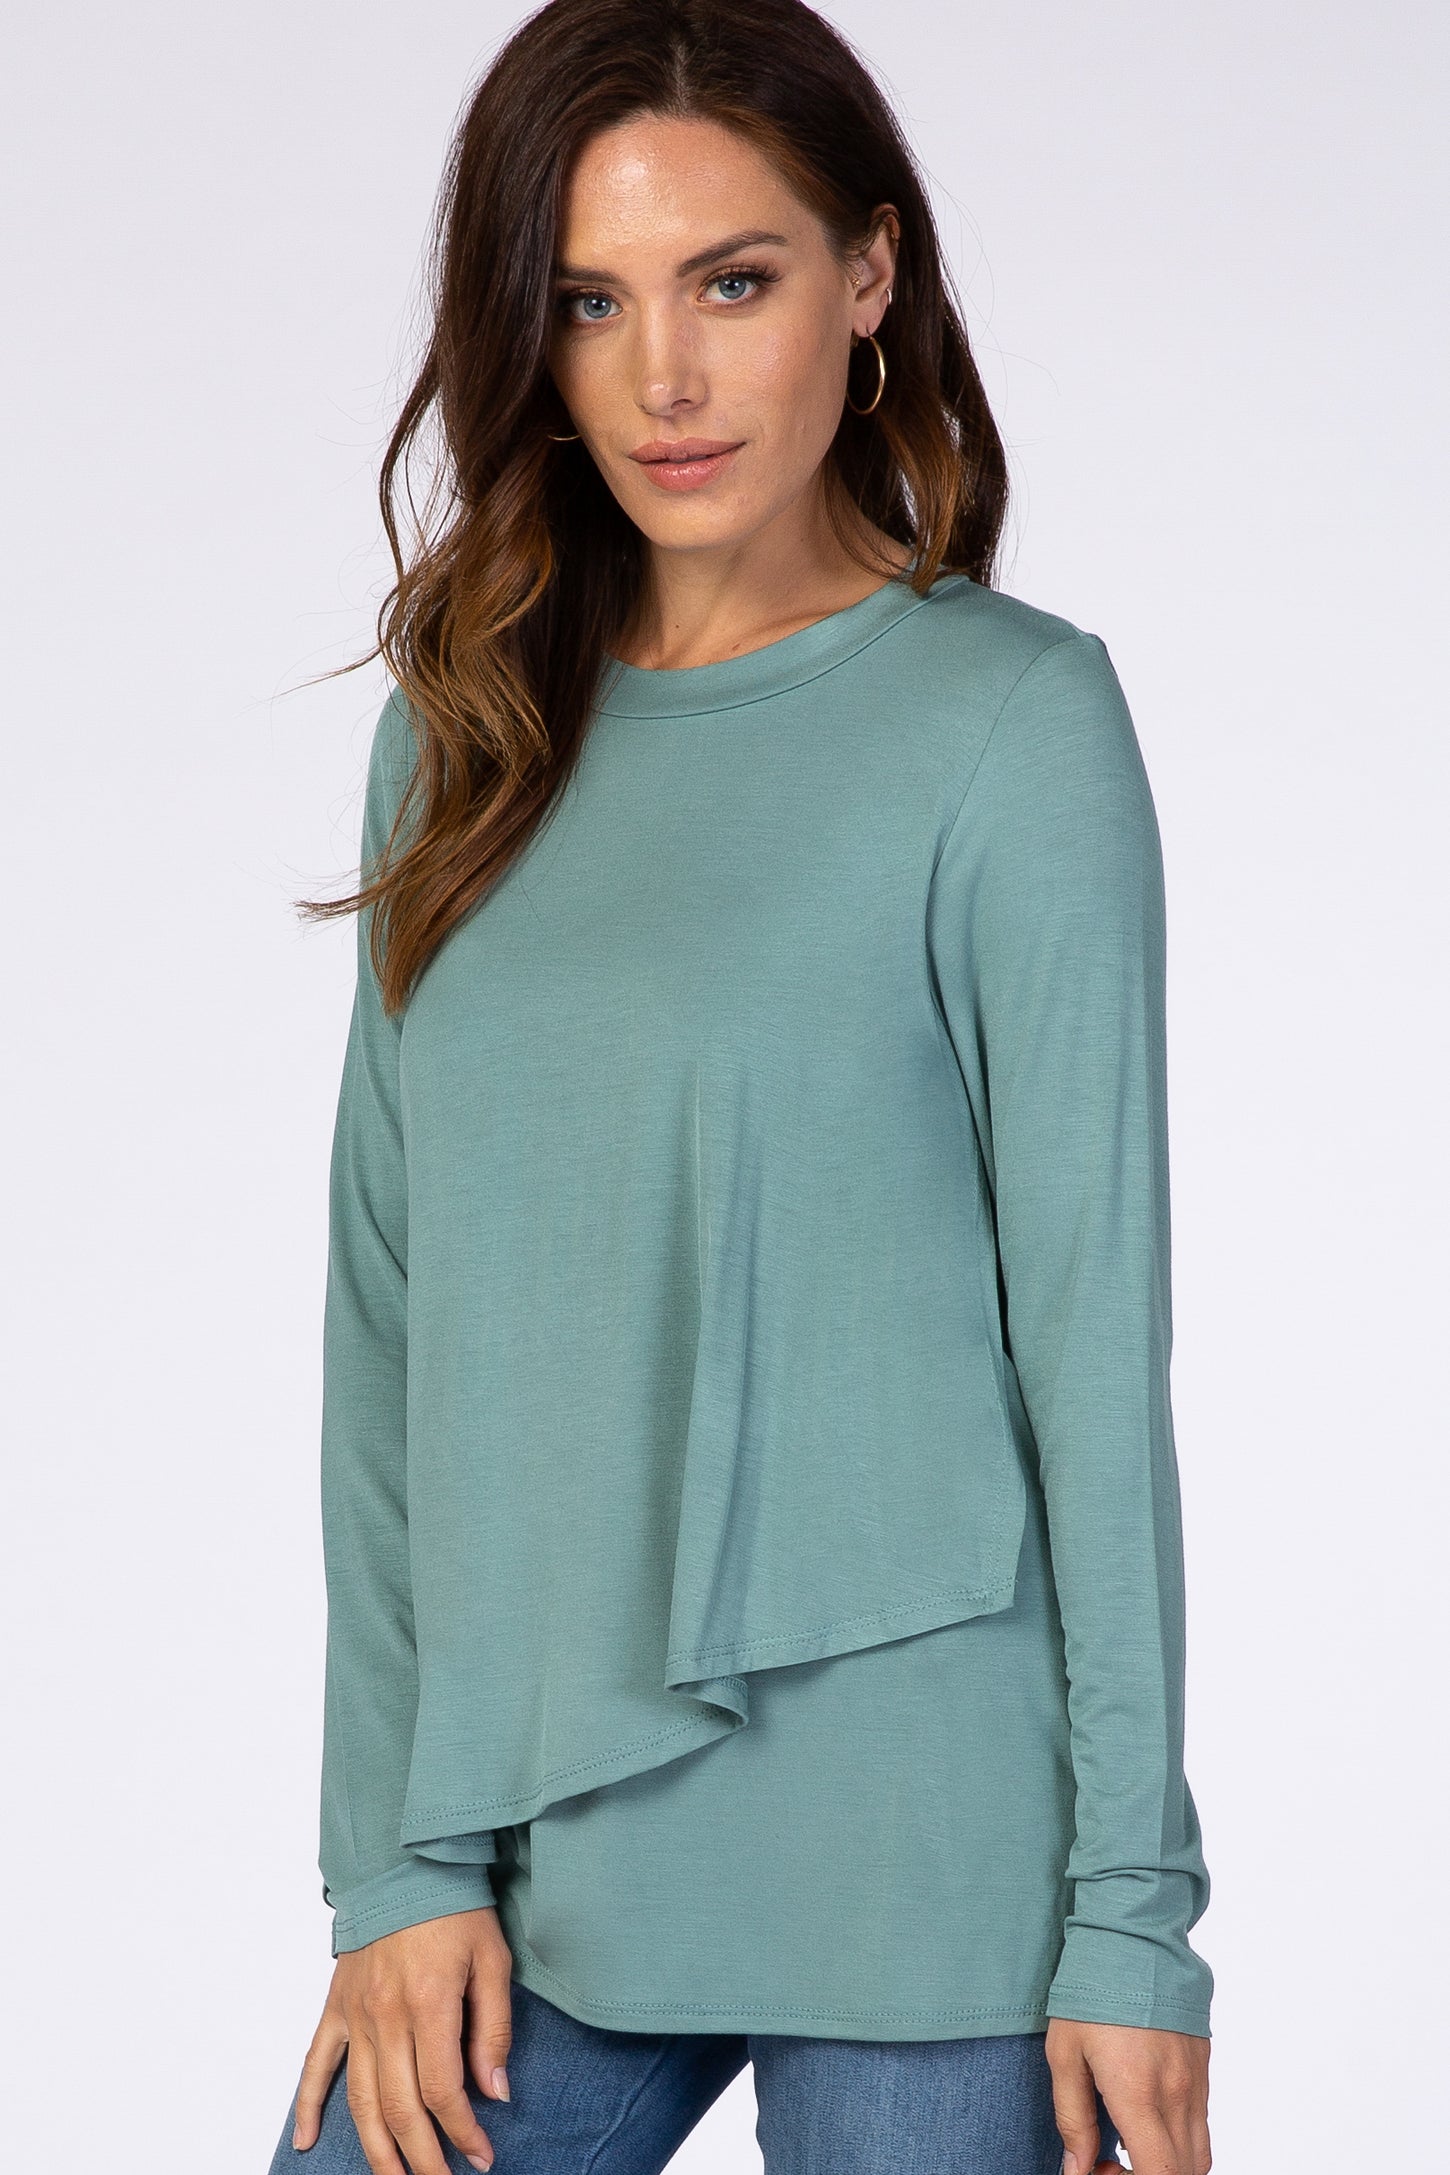 PinkBlush Light Olive Solid Layered Front Long Sleeve Nursing Top